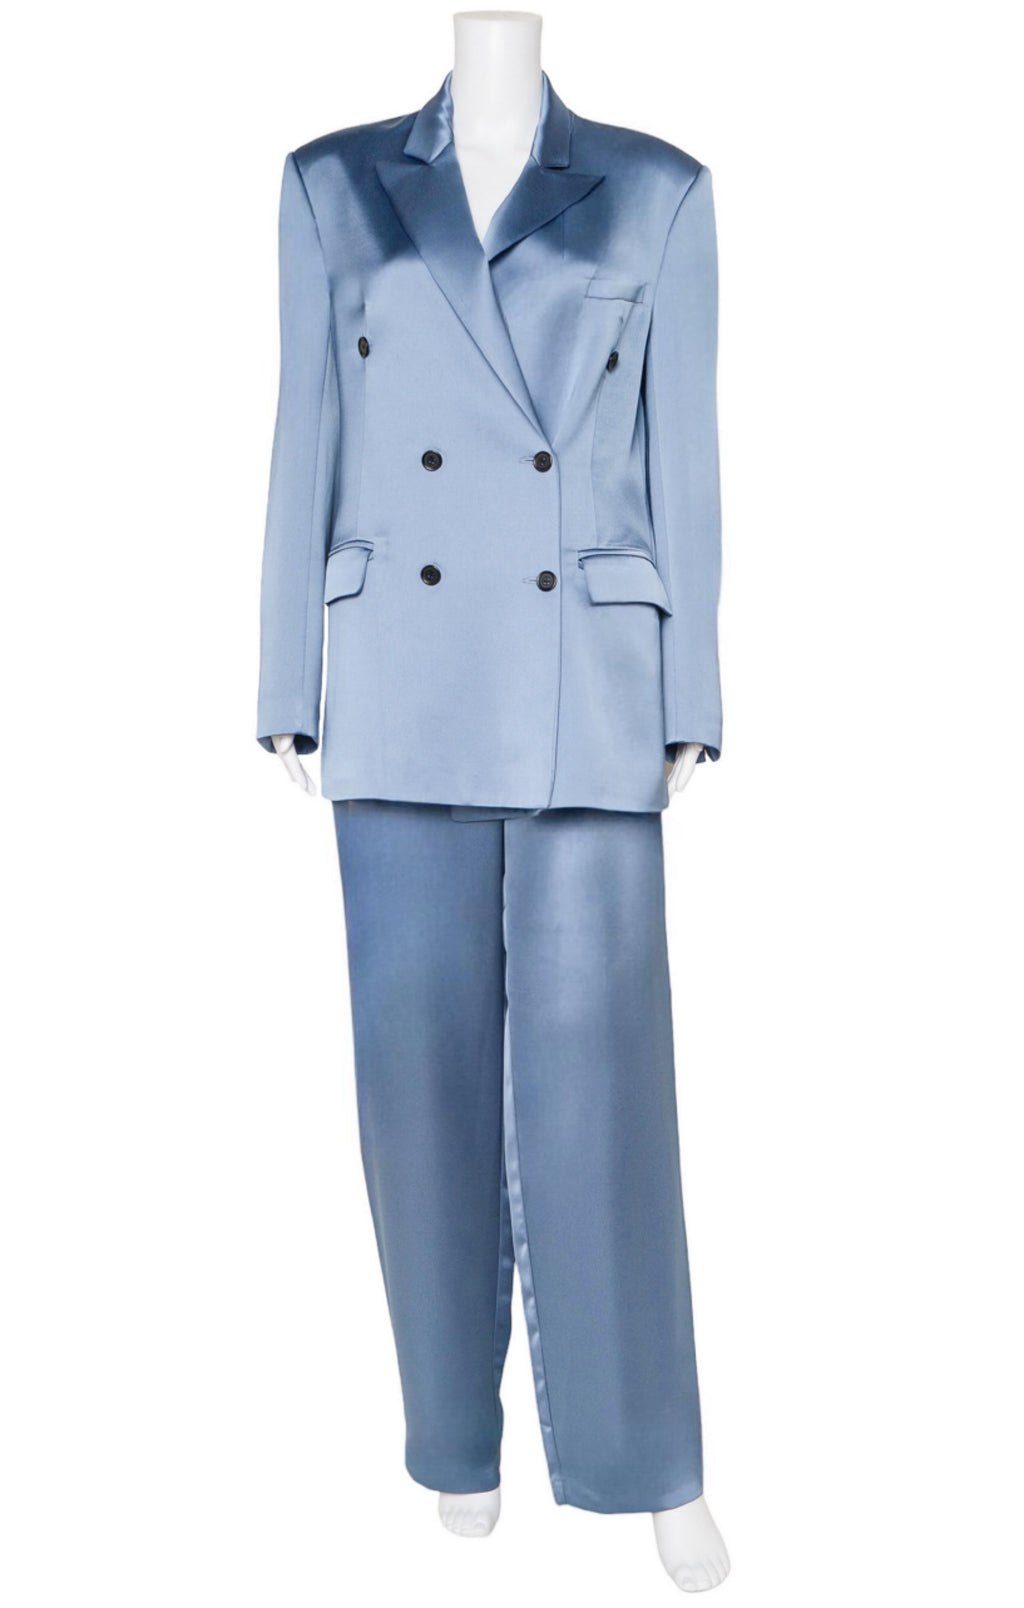 IN THE MOOD FOR LOVE Suit Size: Jacket - S, Pants - L